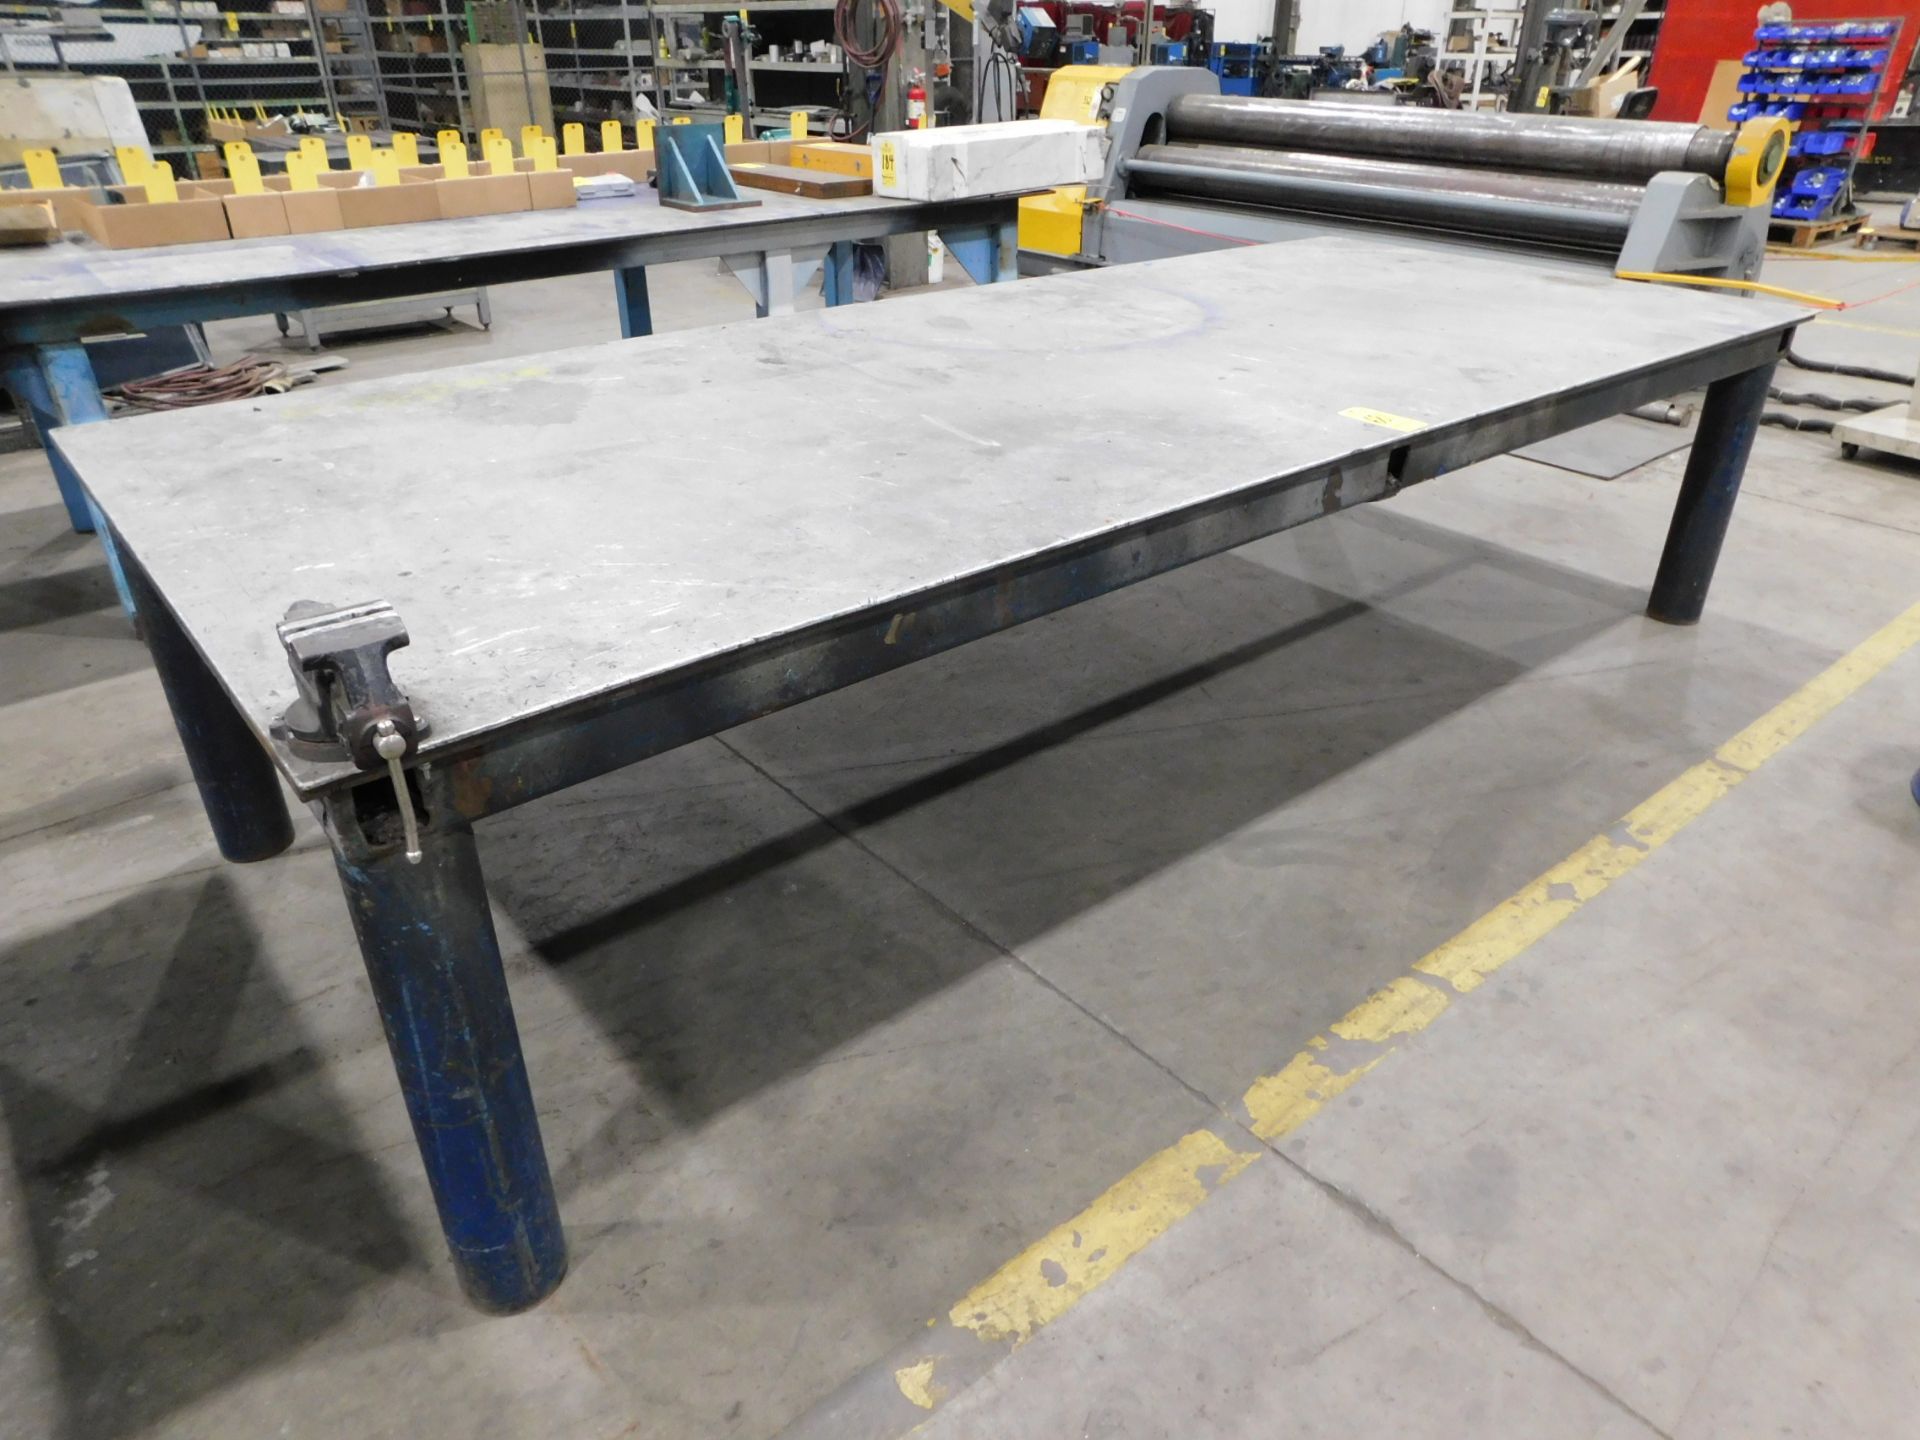 Welding/Layout Table with 3/4" Steel Top and 1/4" Aluminum Top Plate, 60" X 144" X 34" High